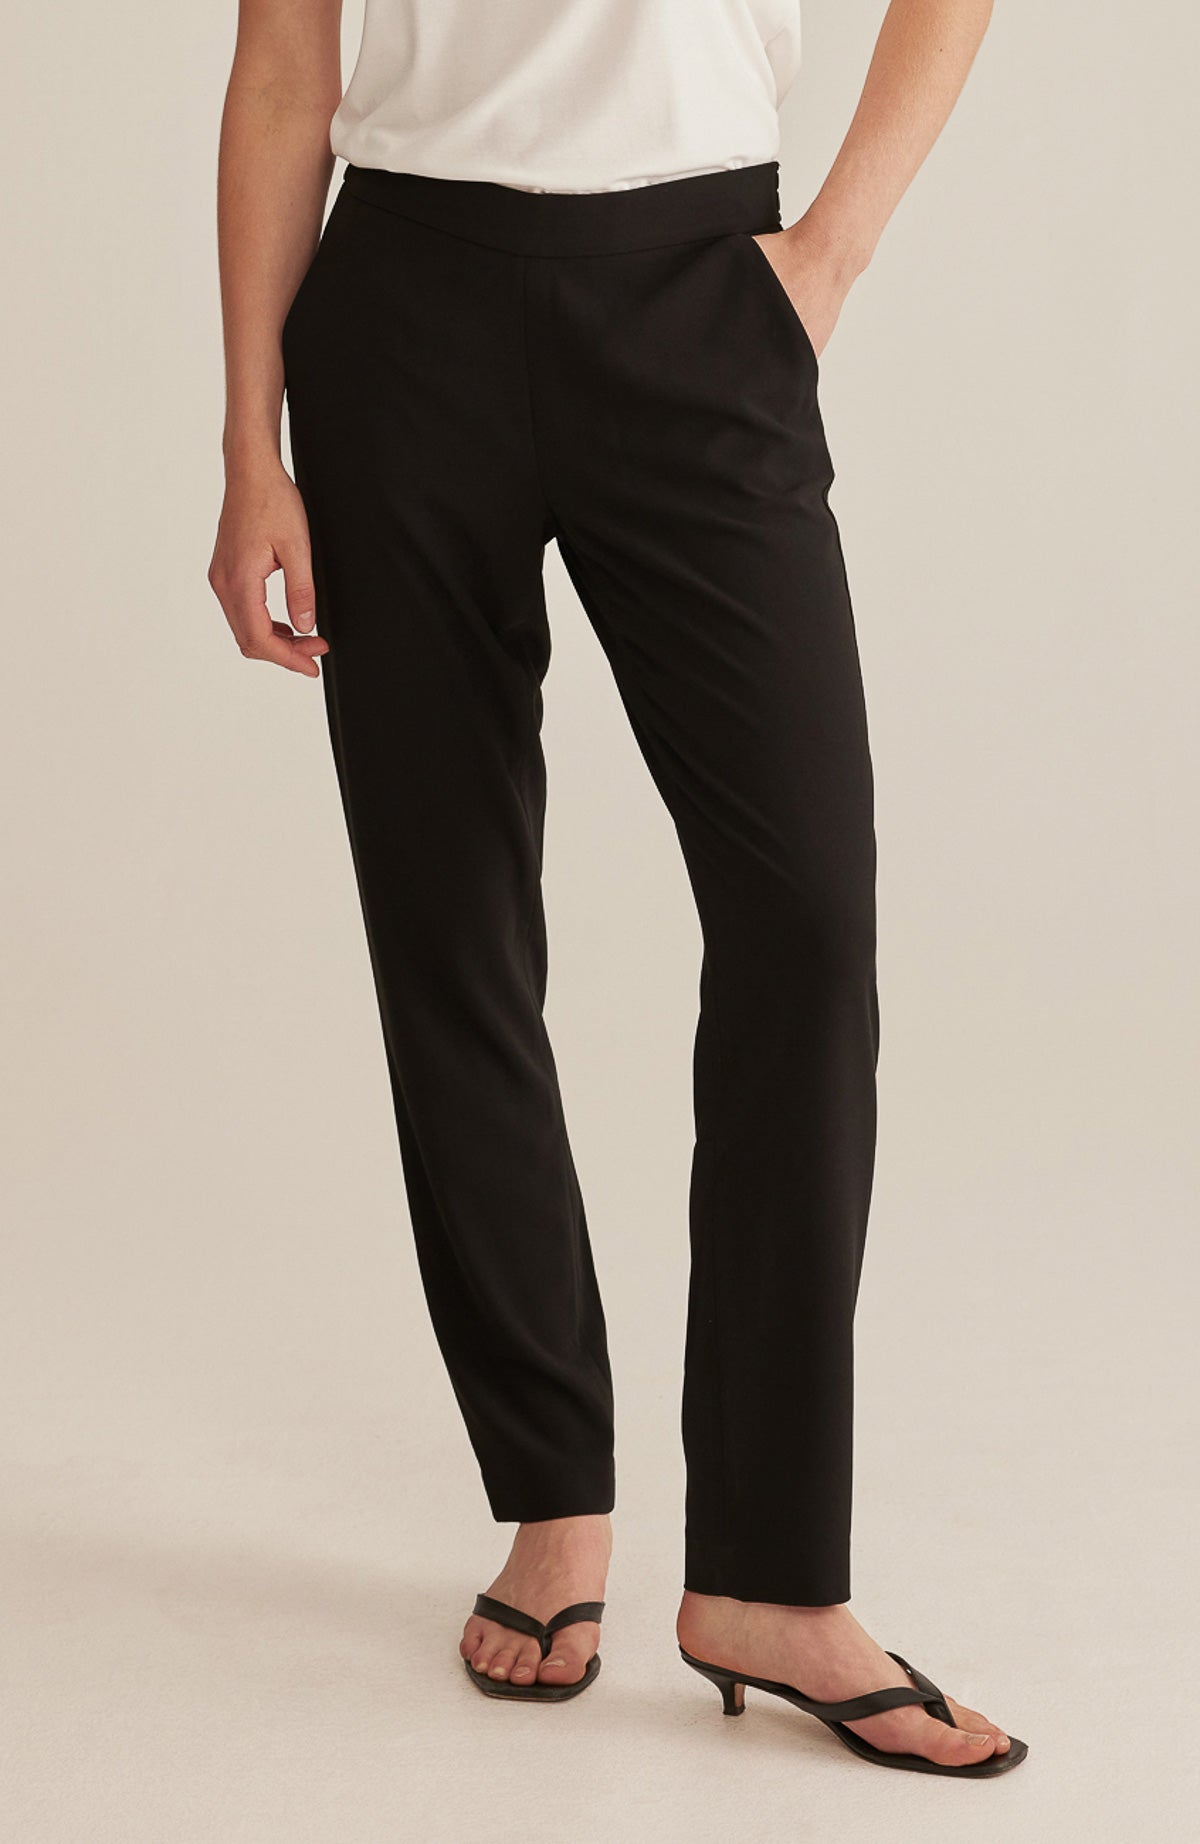 Mockingbird Trousers, tailored trousers, pull-on model | Marville Road